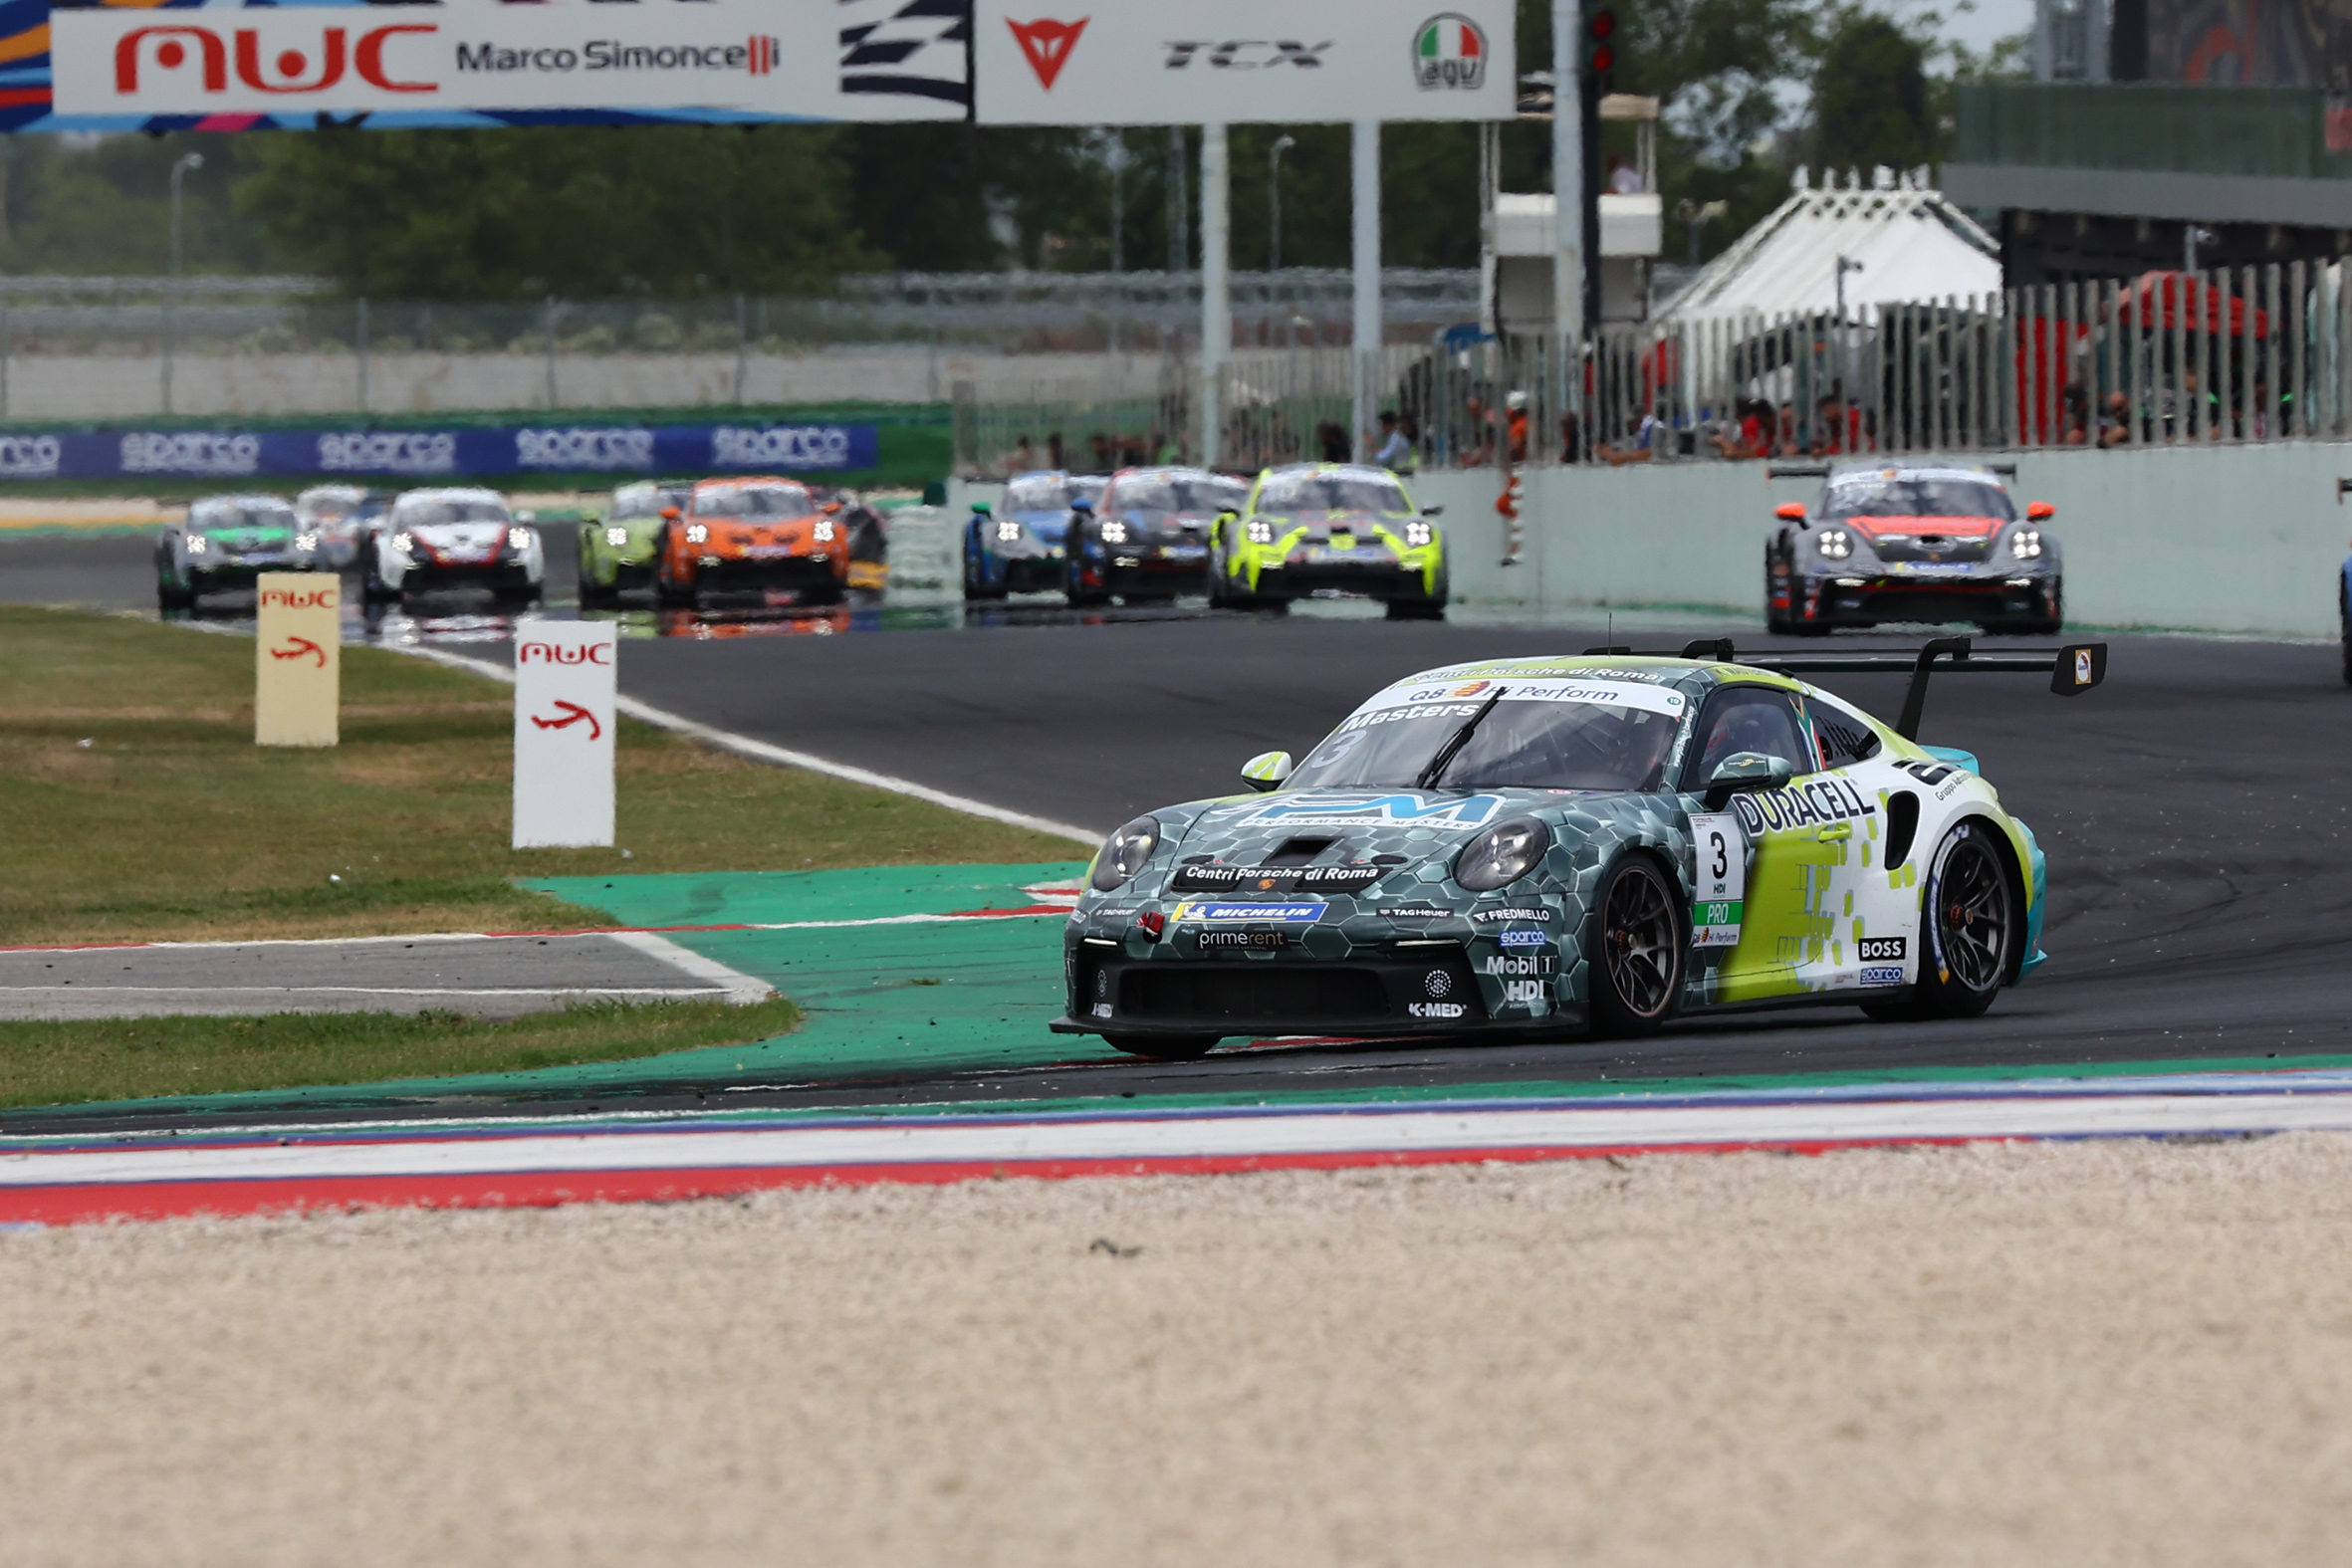 Target with AB Racing scores important points In Misano Italian Porsche Carrera Cup event